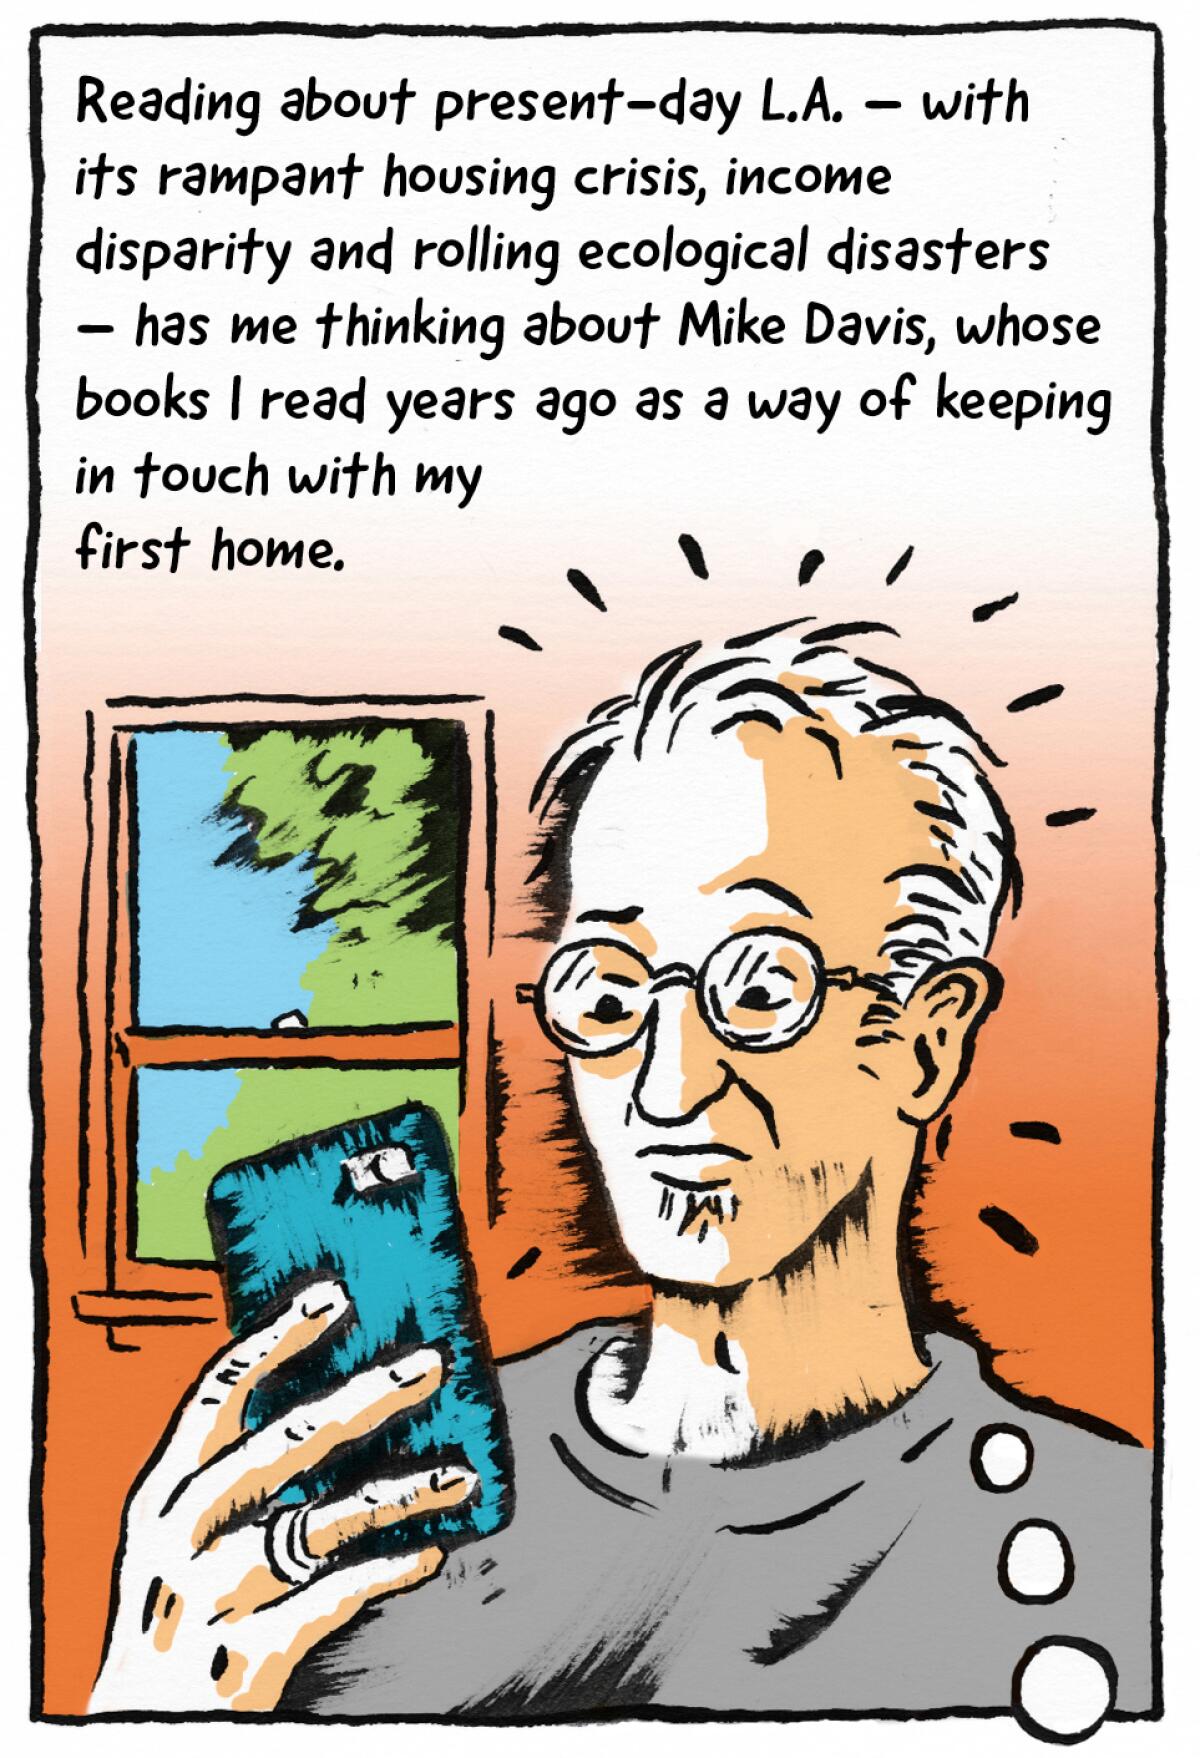 Reading about L.A. with its housing crisis, income disparity and ecological disasters — has me thinking about Mike Davis.